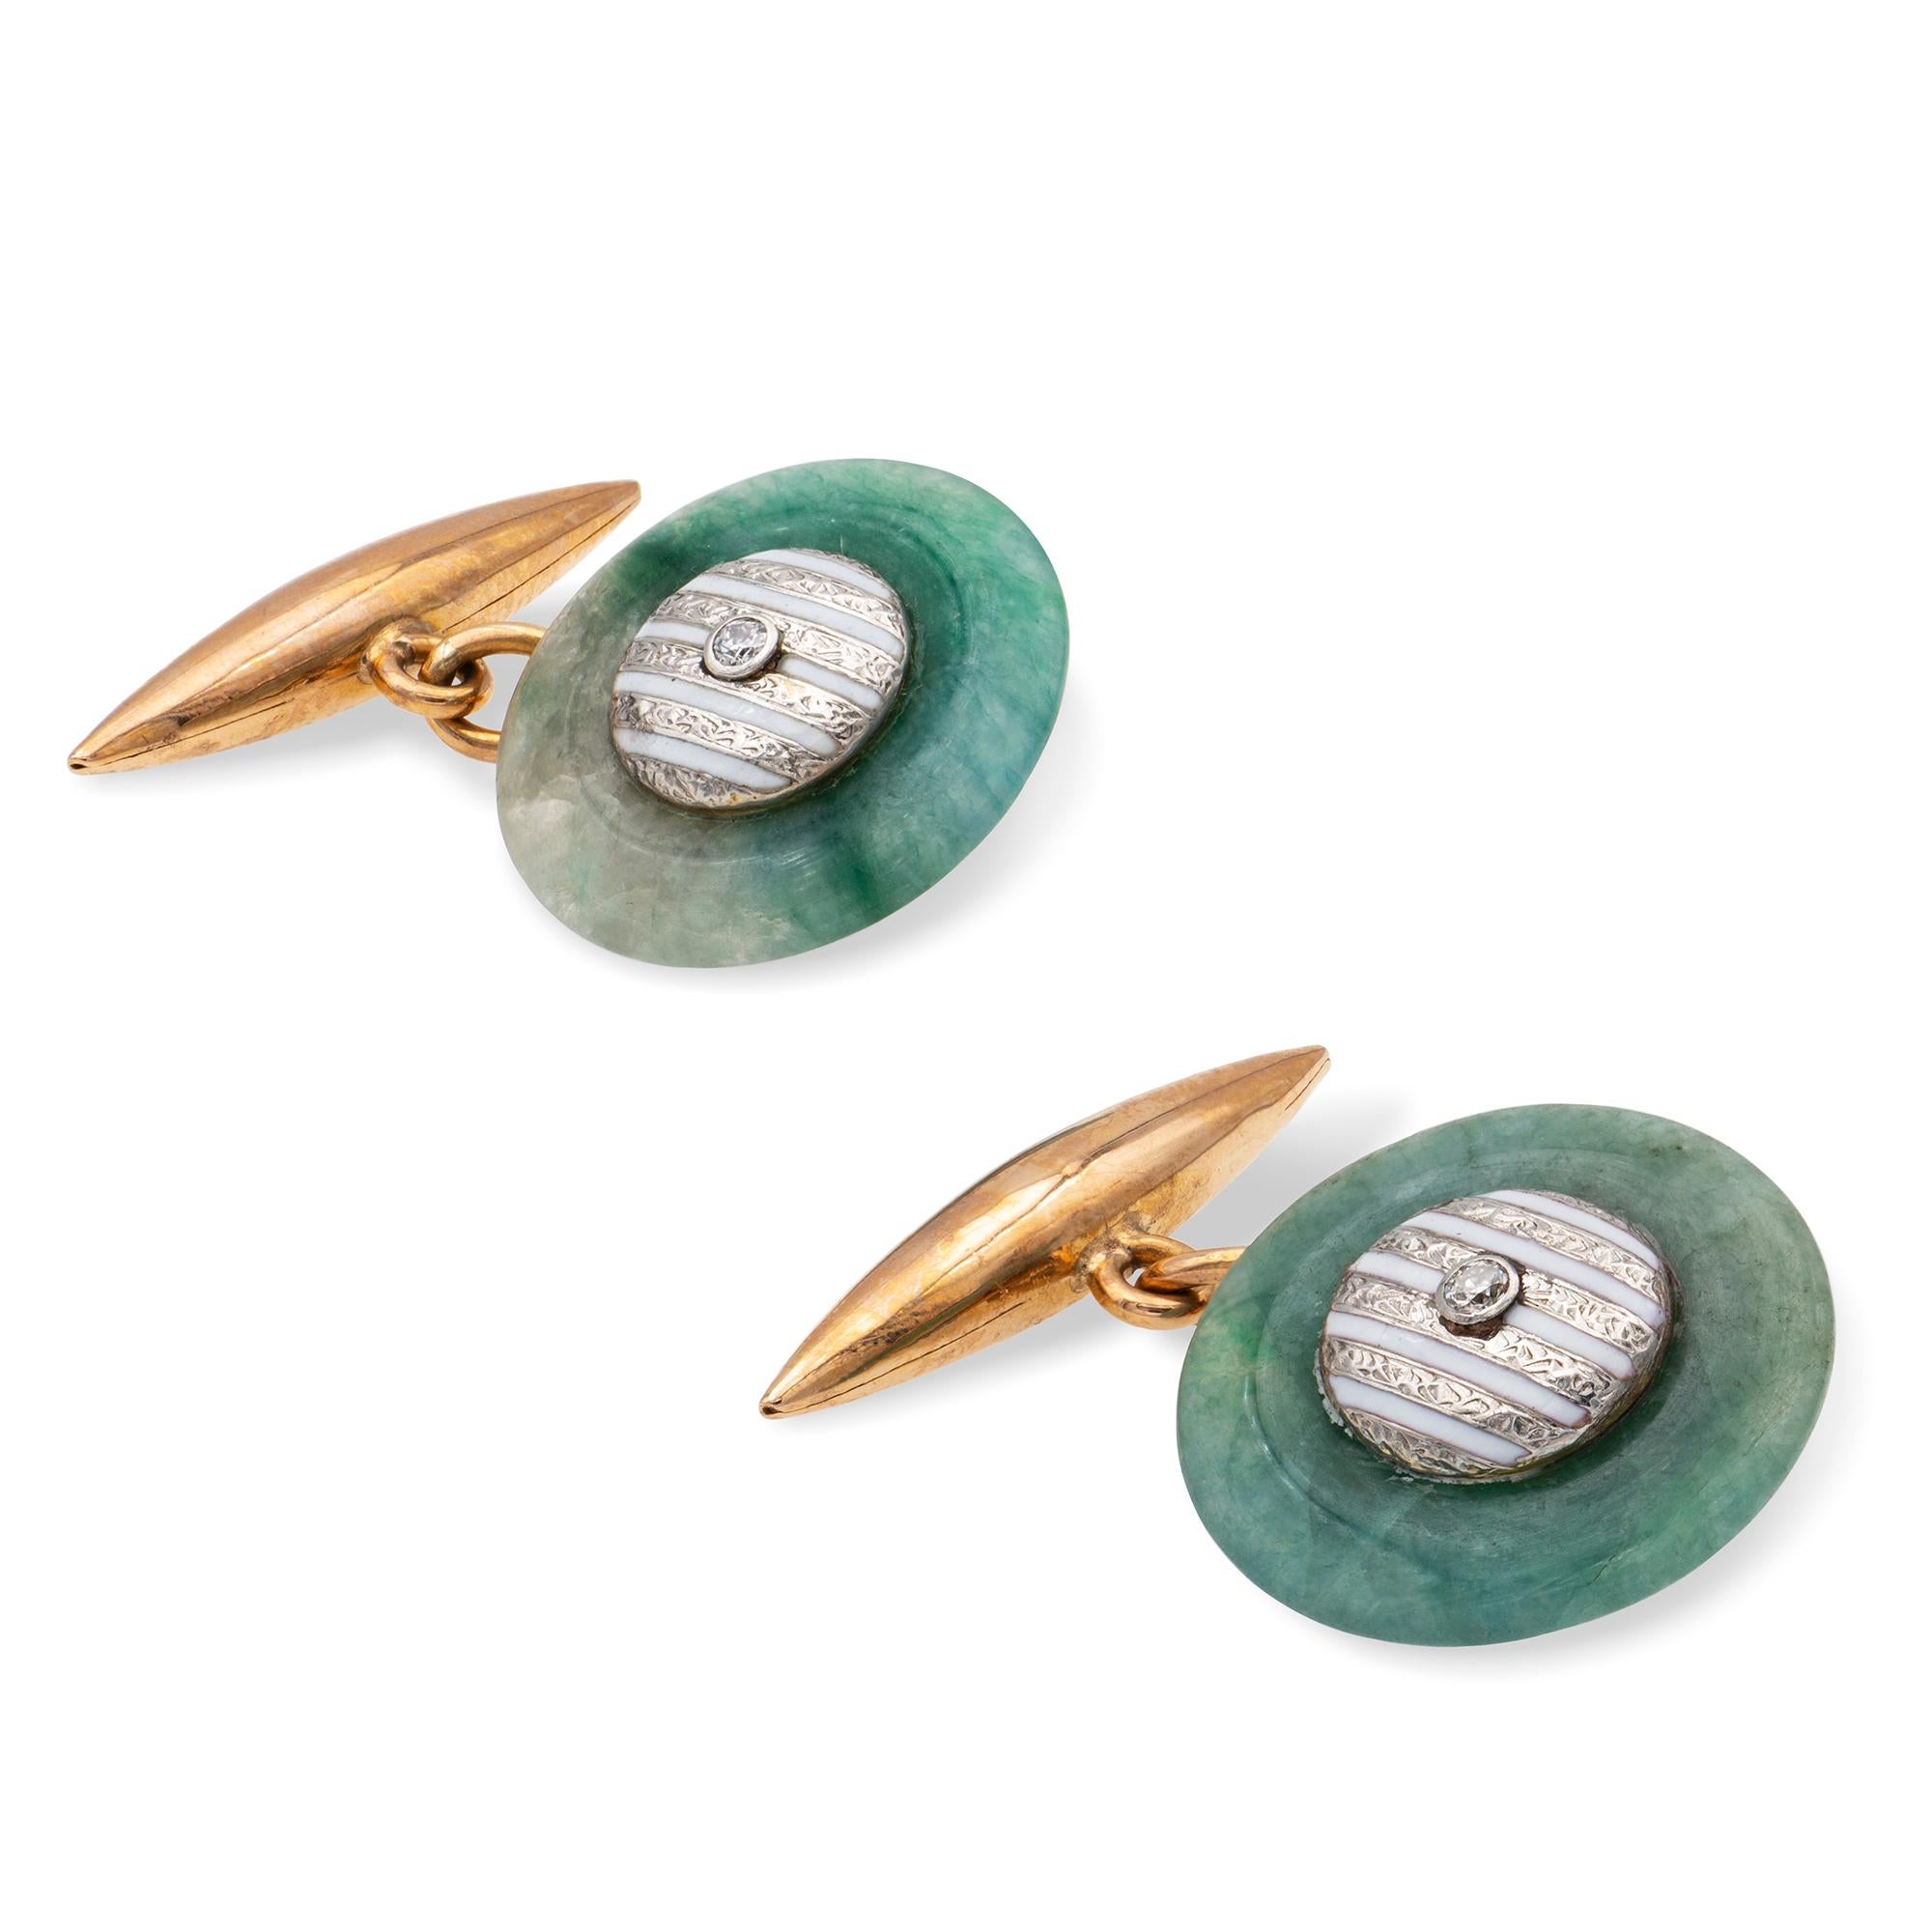 A pair of mid-20th century jade and enamel cufflinks, each link consisting a jade disk centrally set with a round brilliant-cut diamond on a white gold background with white enamel stripes, linked to a yellow gold torpedo-shape bar, circa 1960, the